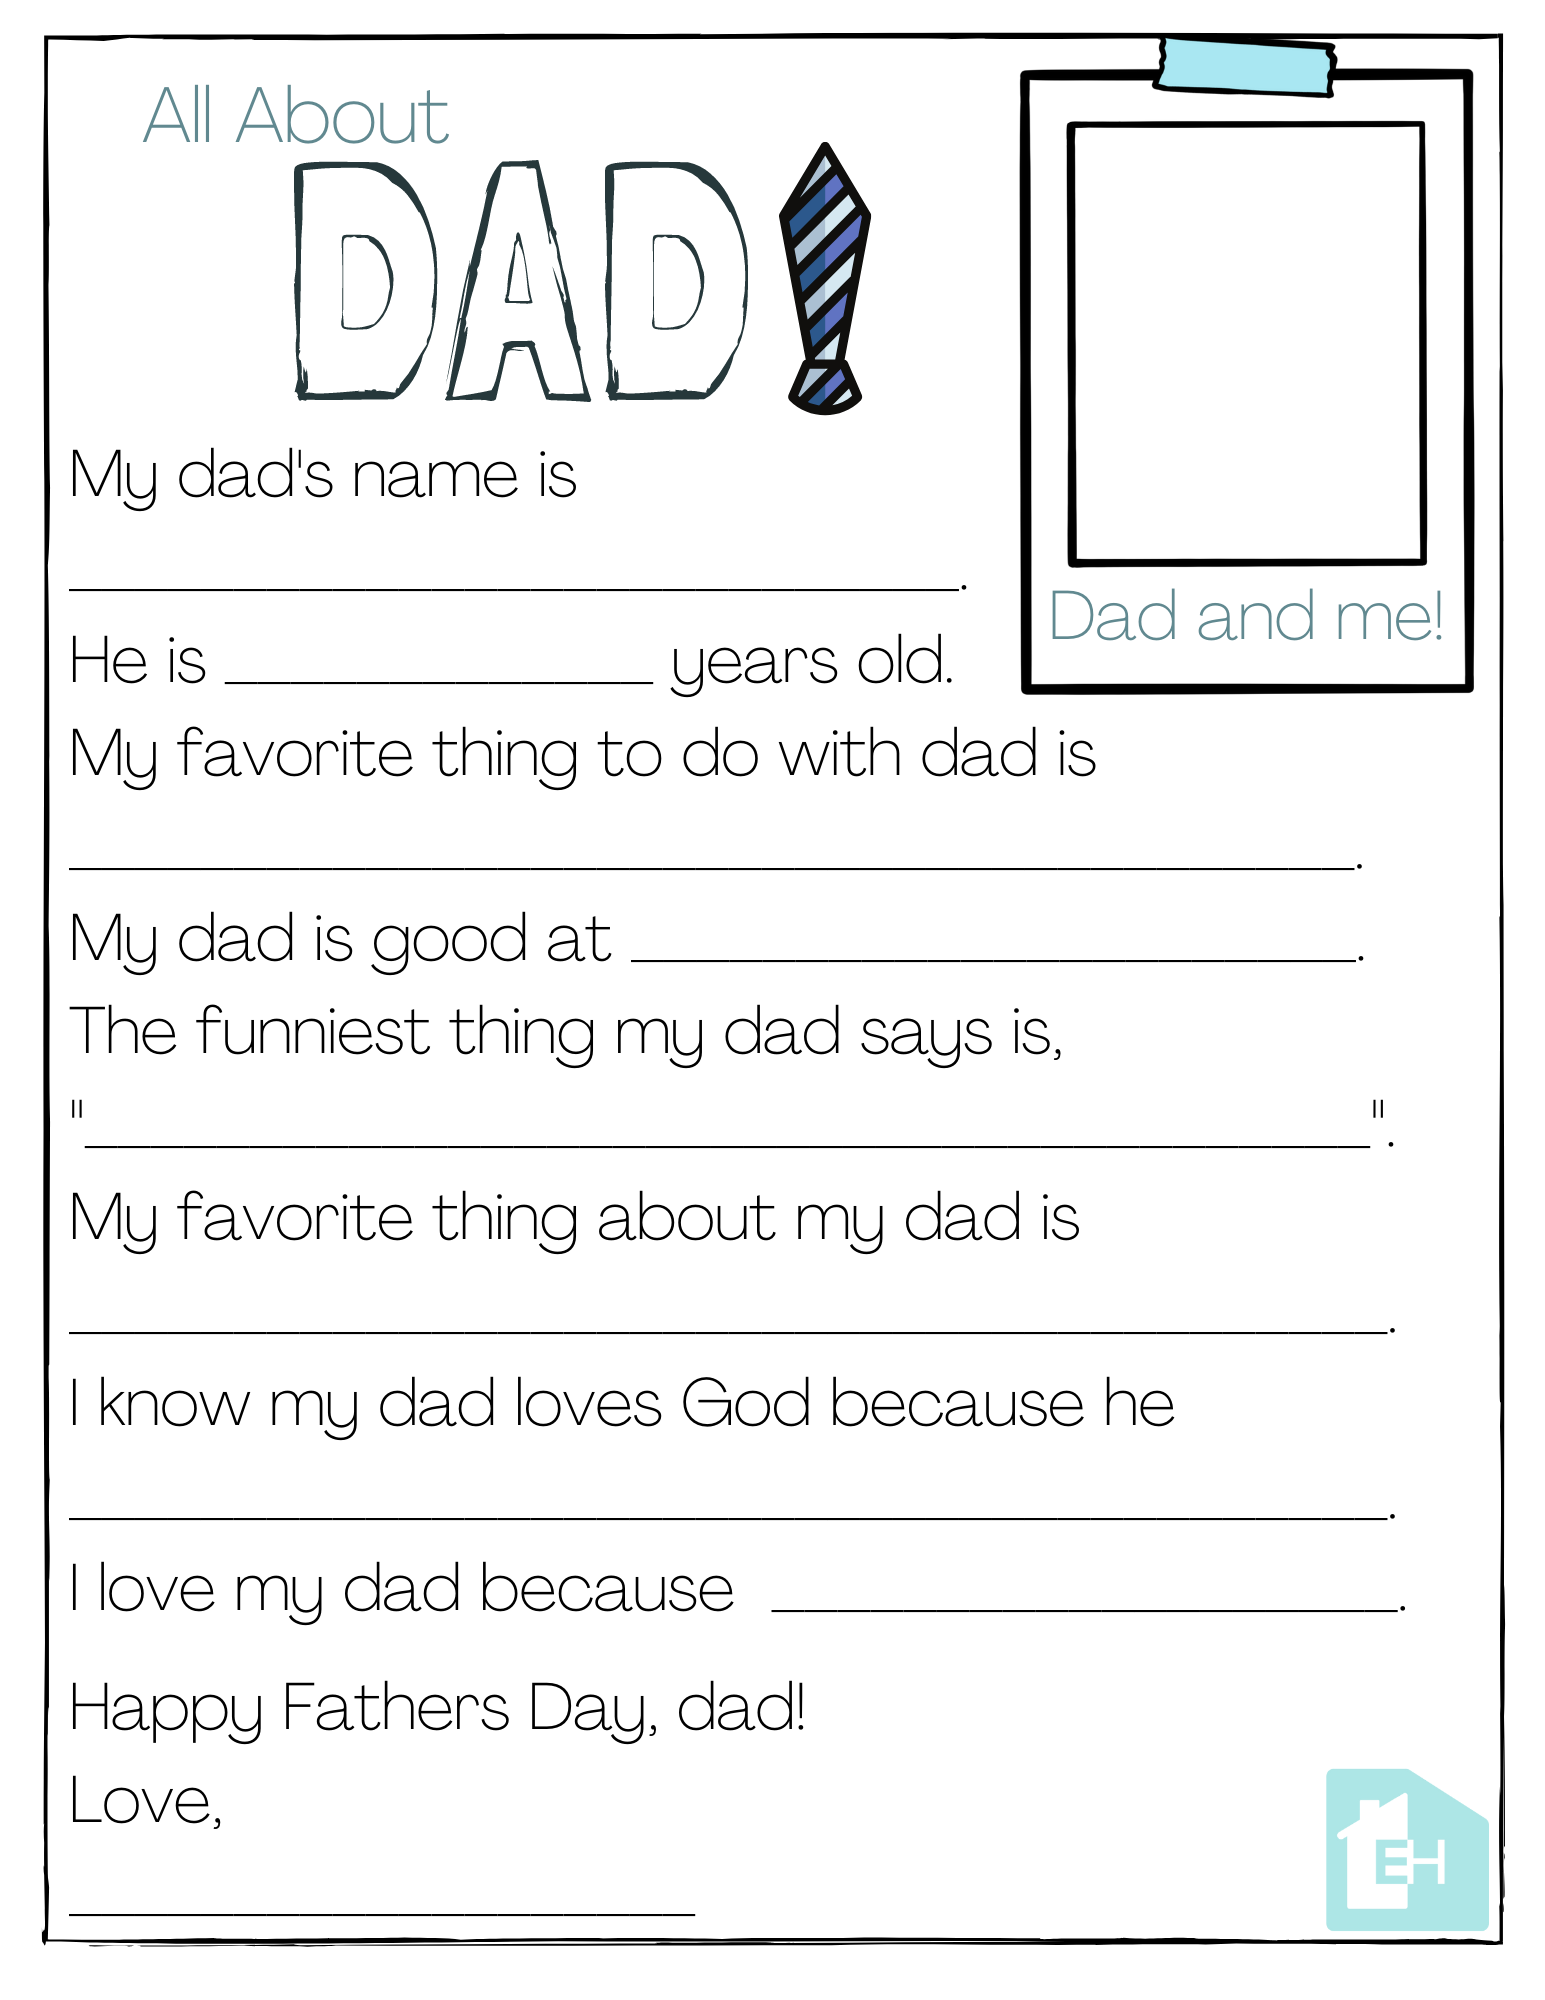 about-my-dad-free-printable-empowered-homes